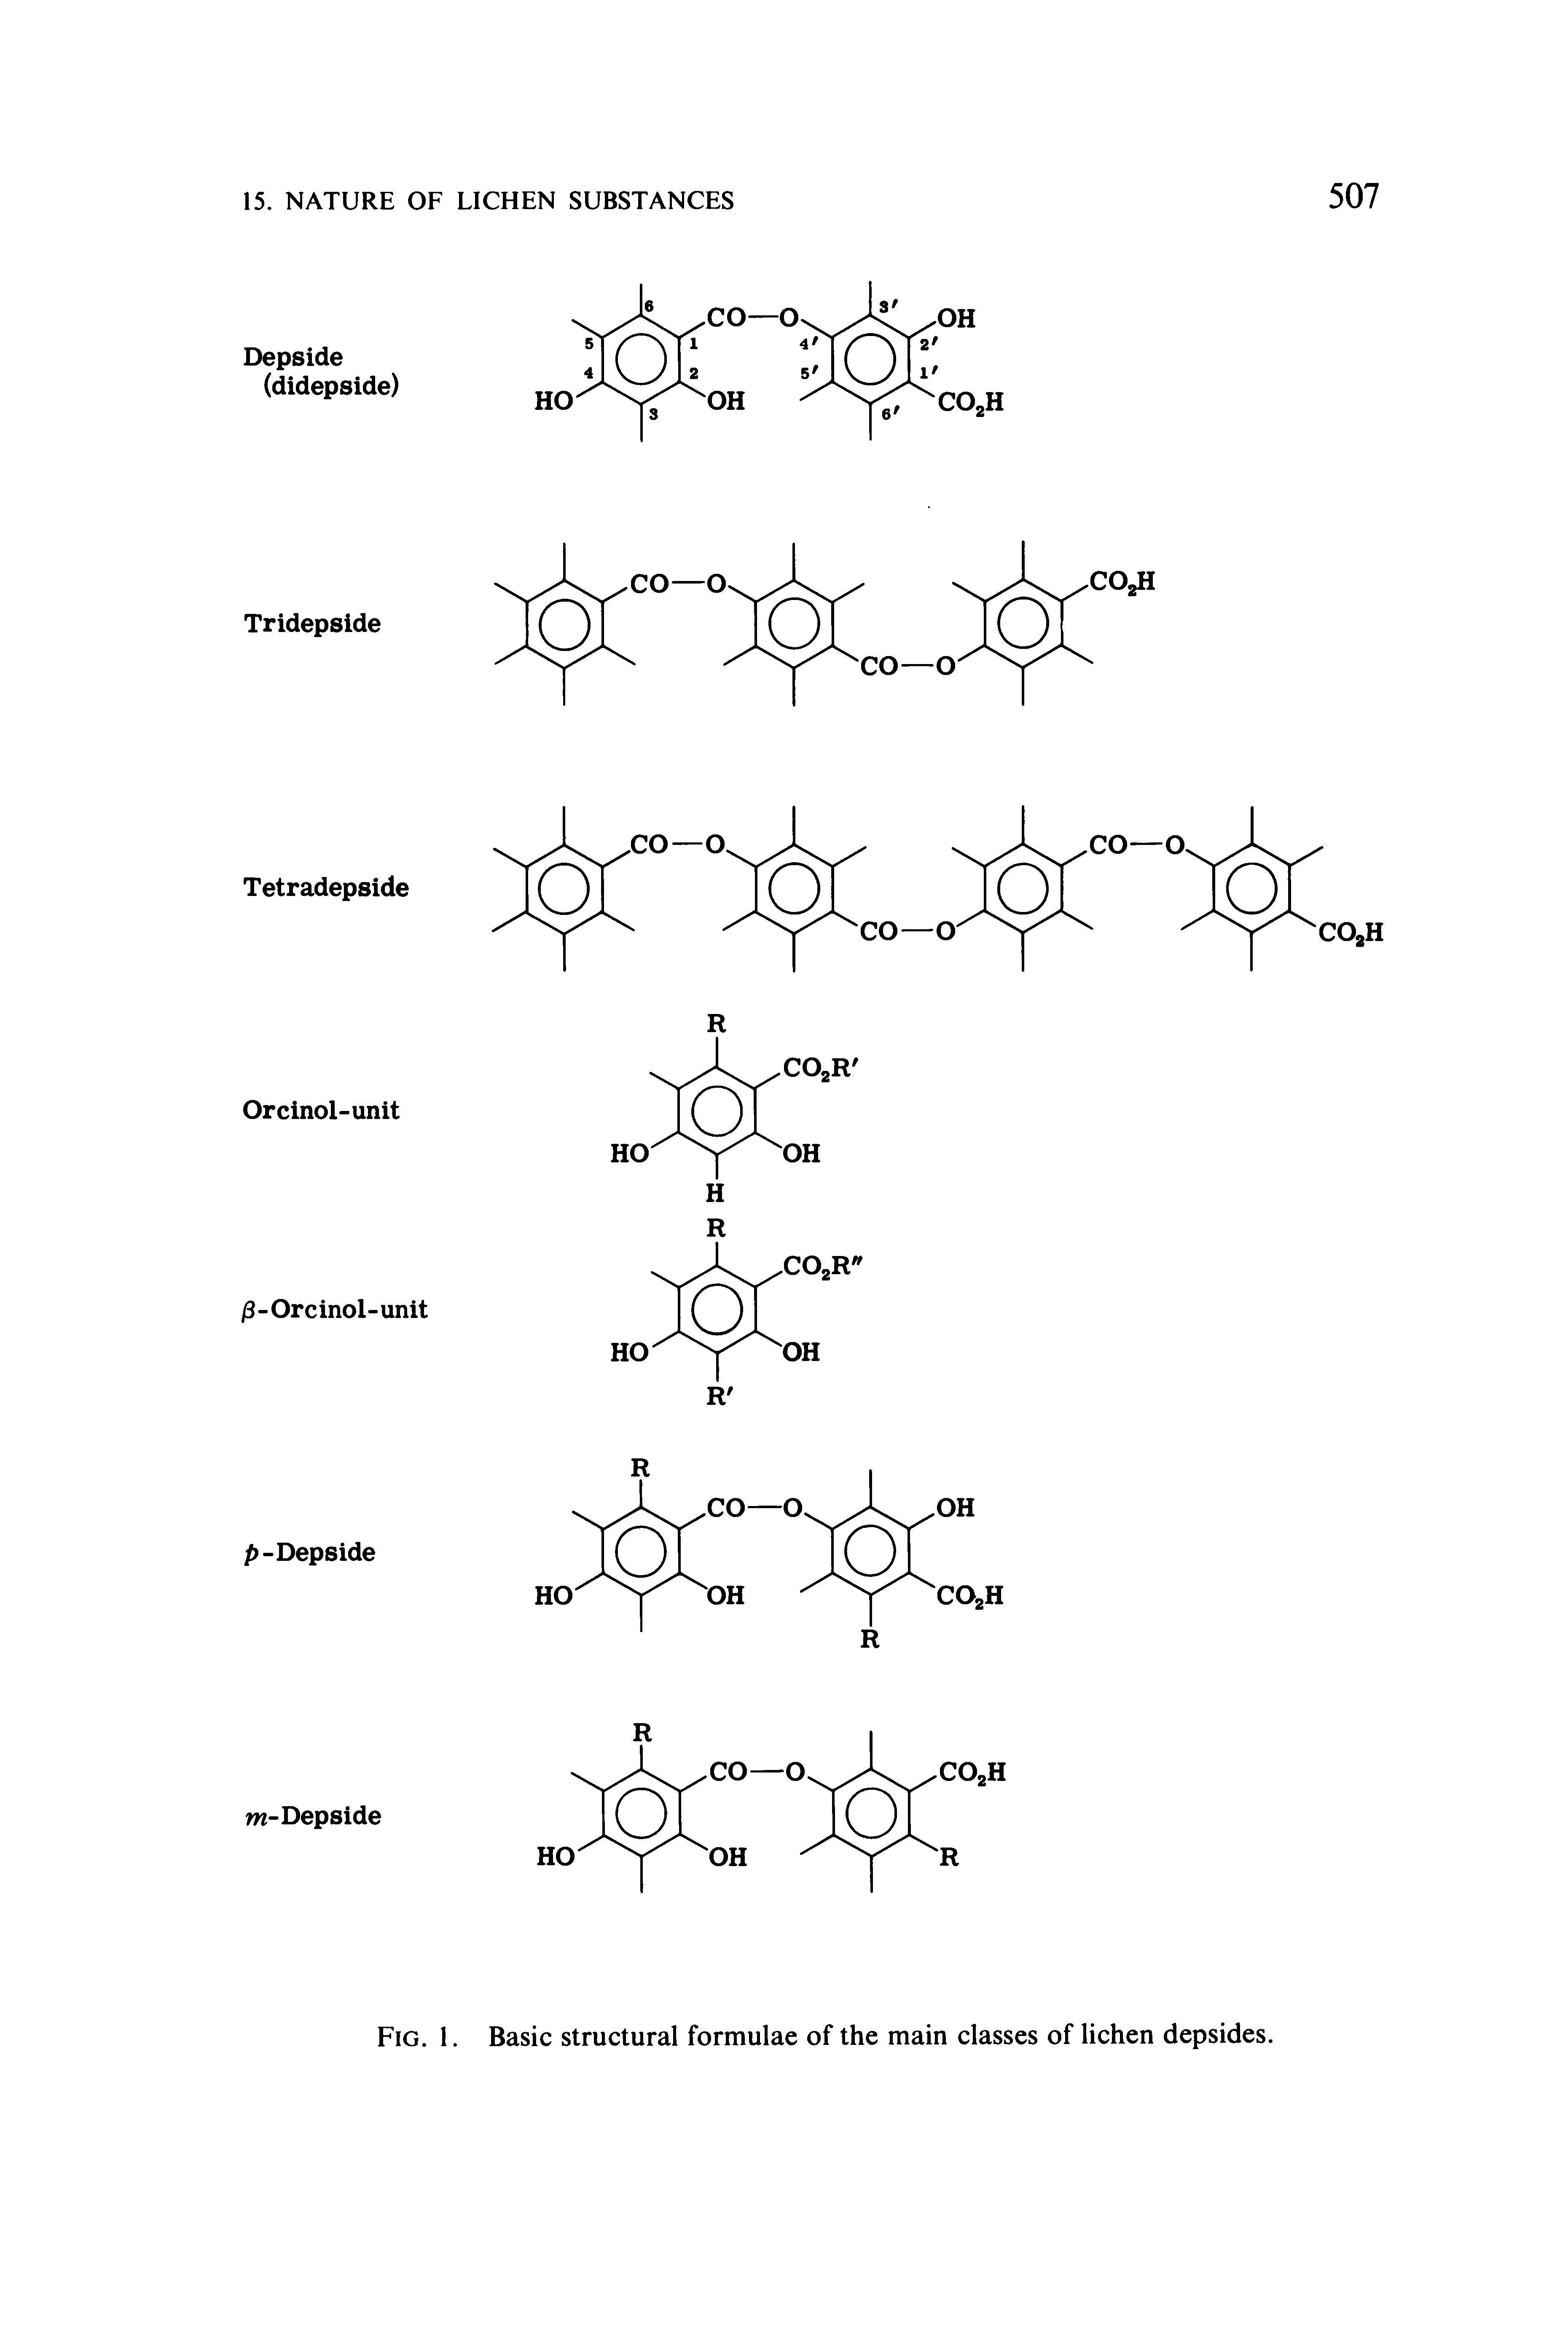 Fig. 1. Basic structural formulae of the main classes of lichen depsides.